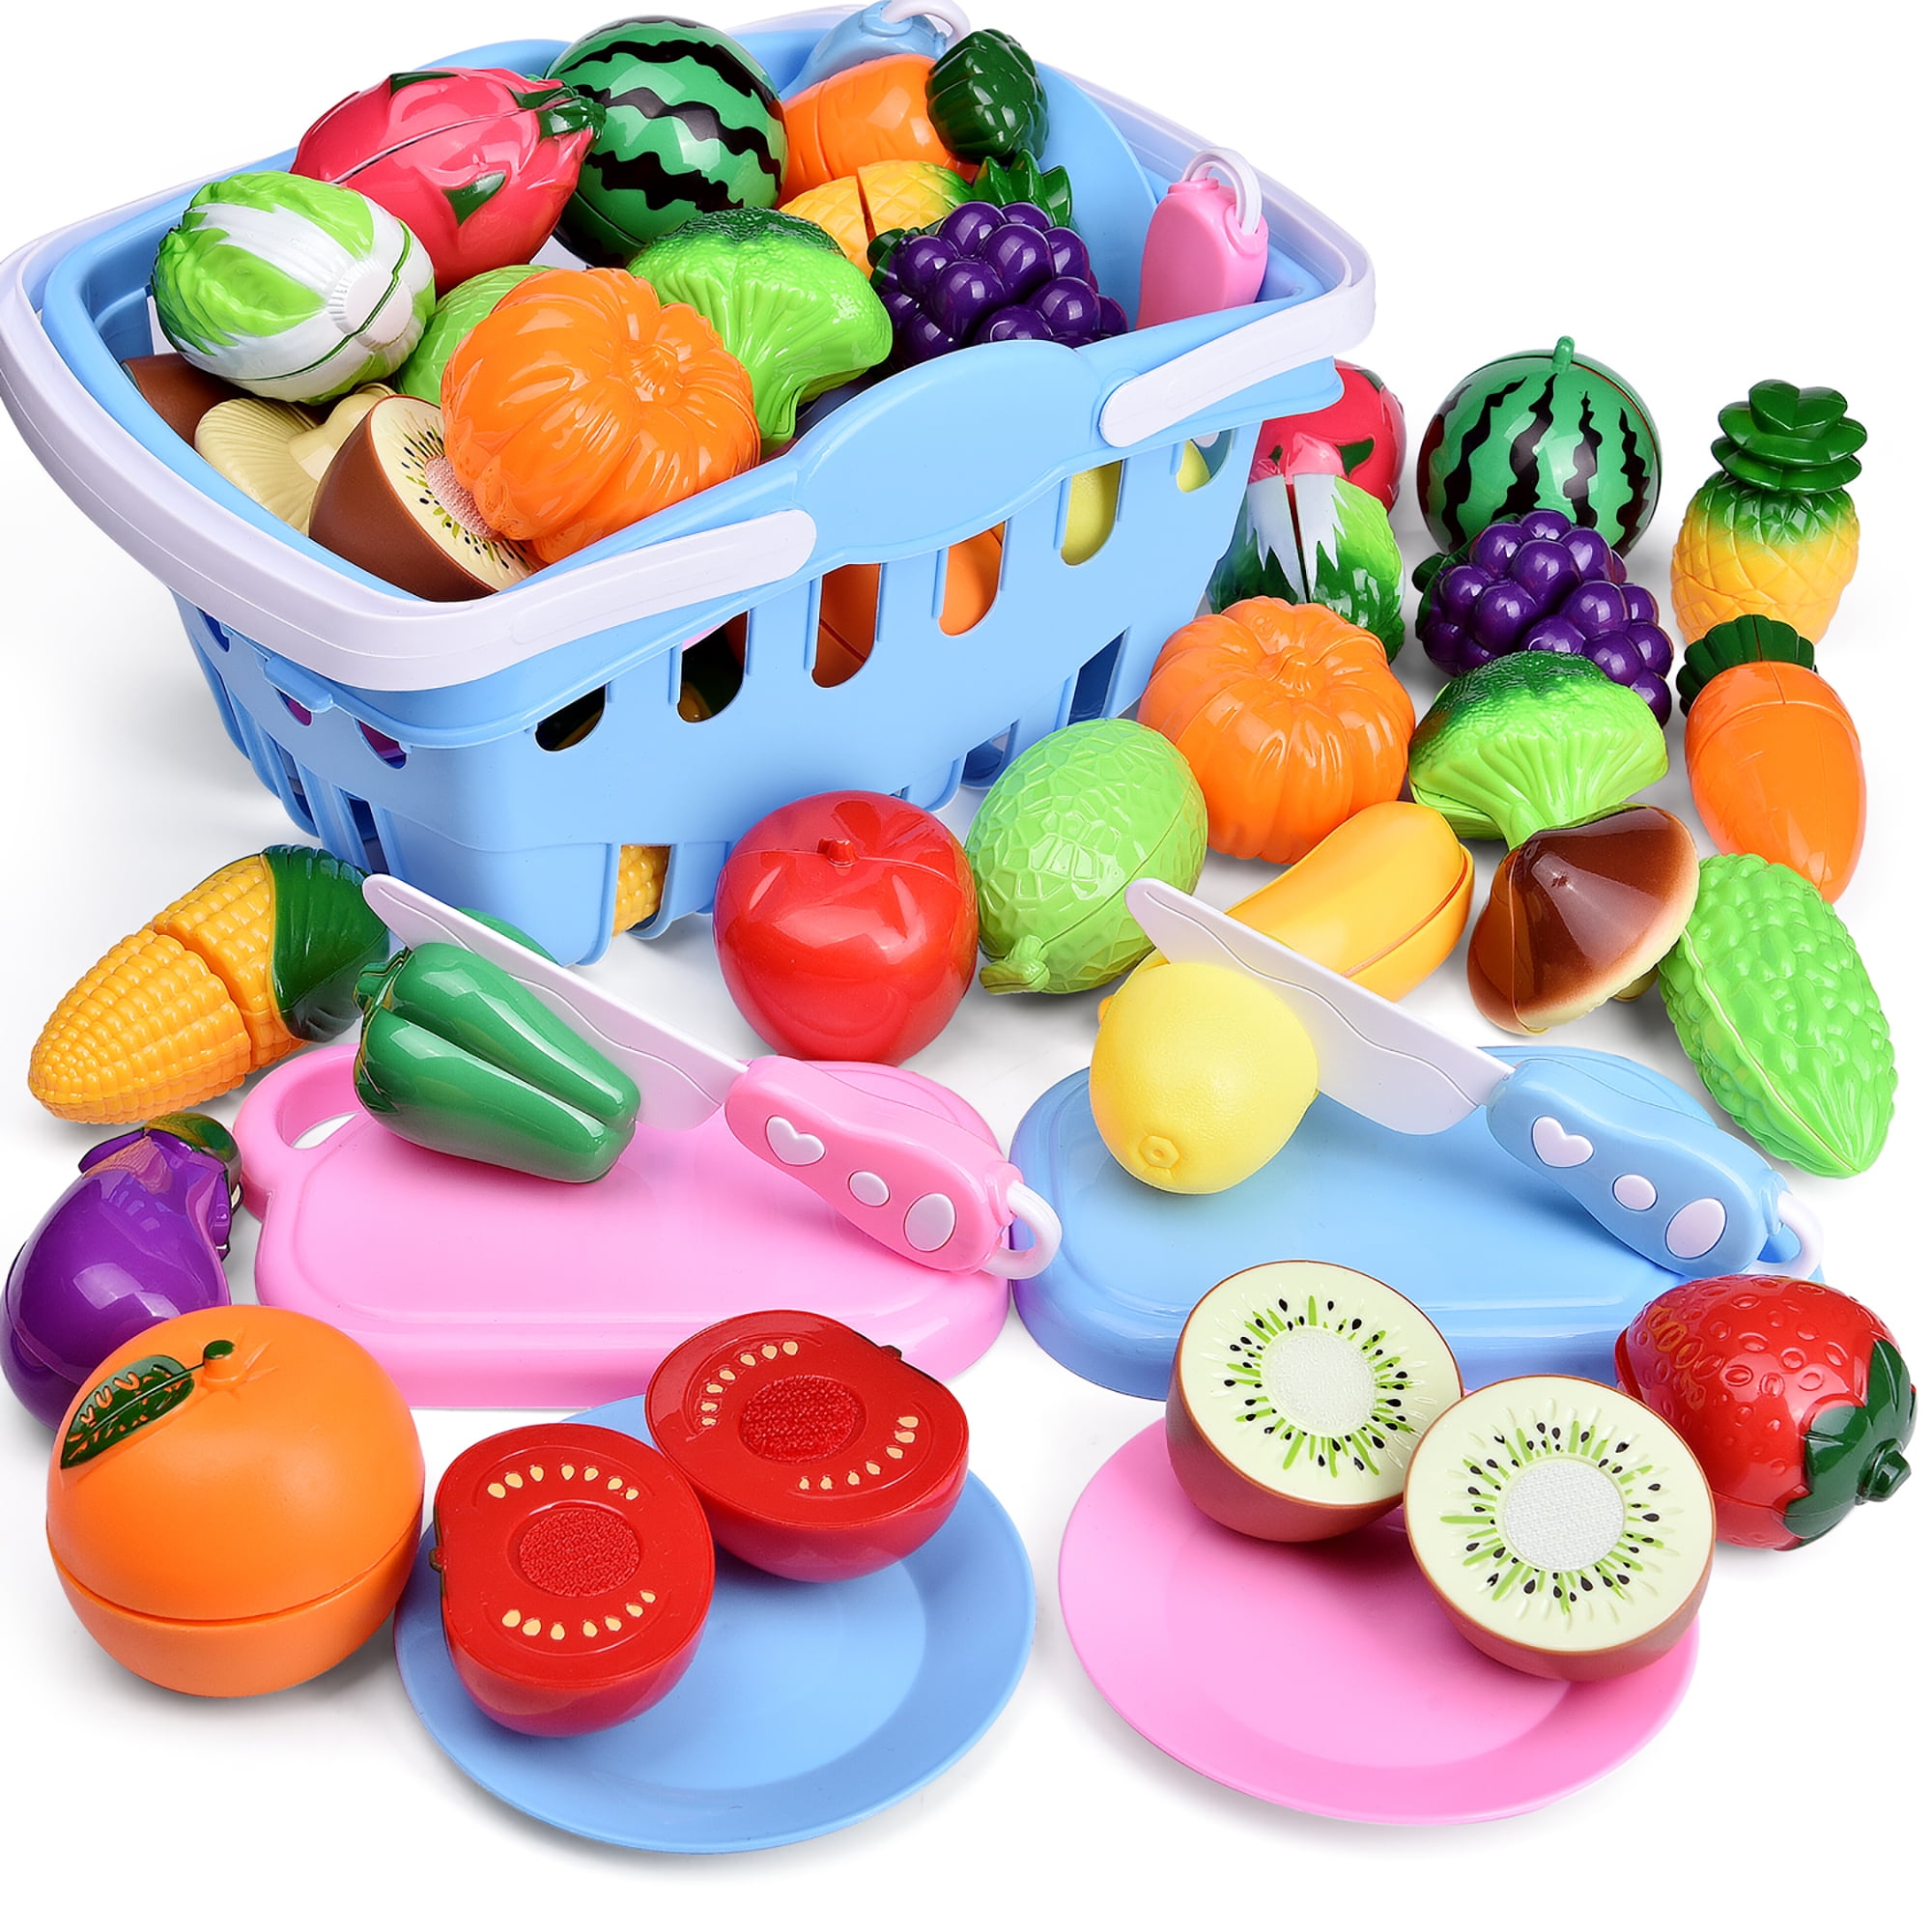 Fun Pretend Play Props Play House Kitchen Food Fruit Bowl Grocery Basket Toy 